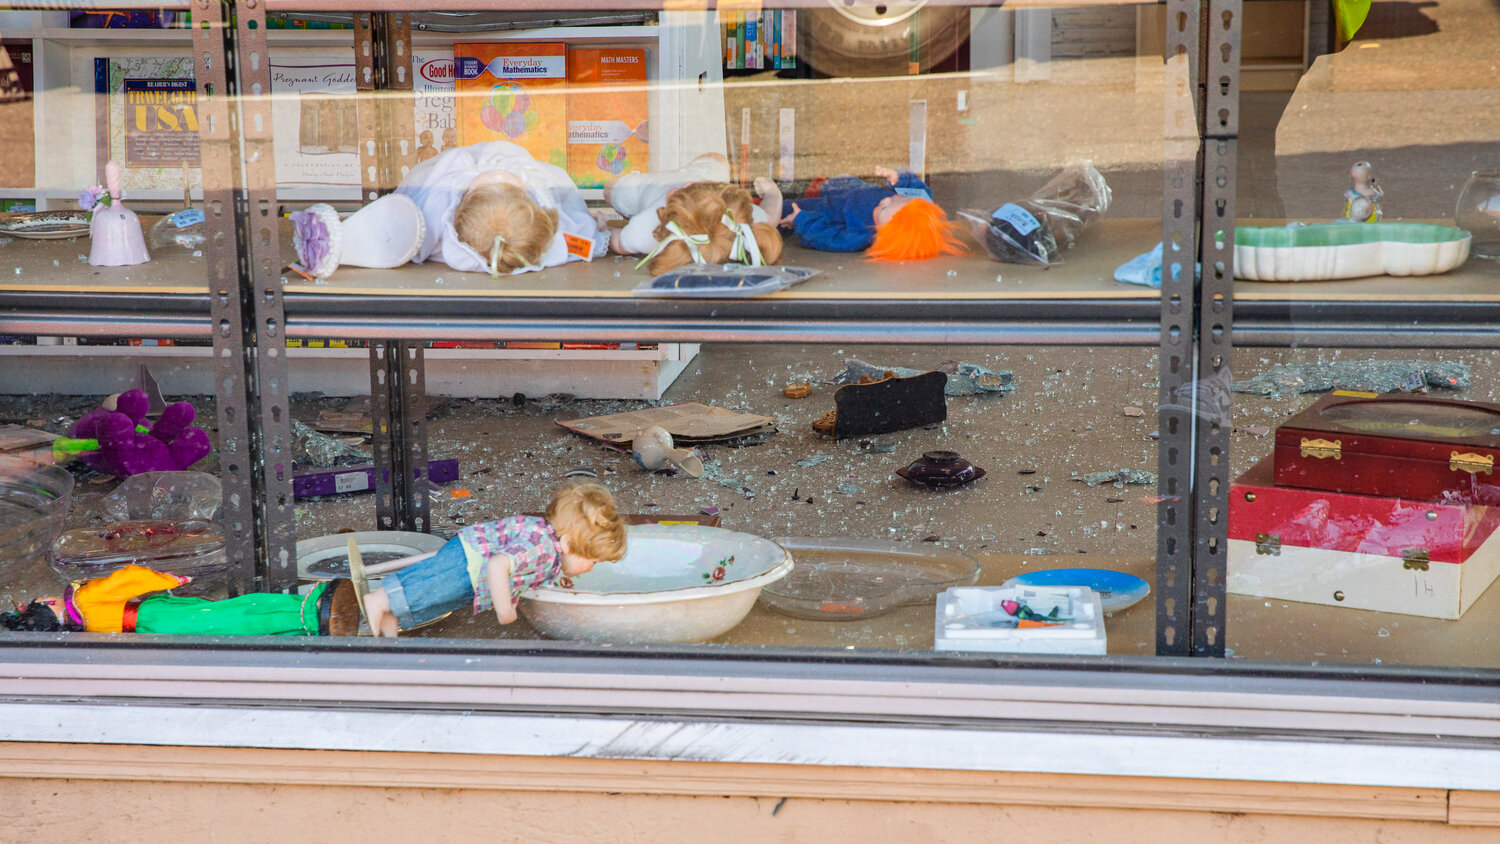 Glass is seen shattered at Visiting Nurses in Centralia after a vehicle crashed through windows, destroying shelves full of items, at the location Thursday morning.